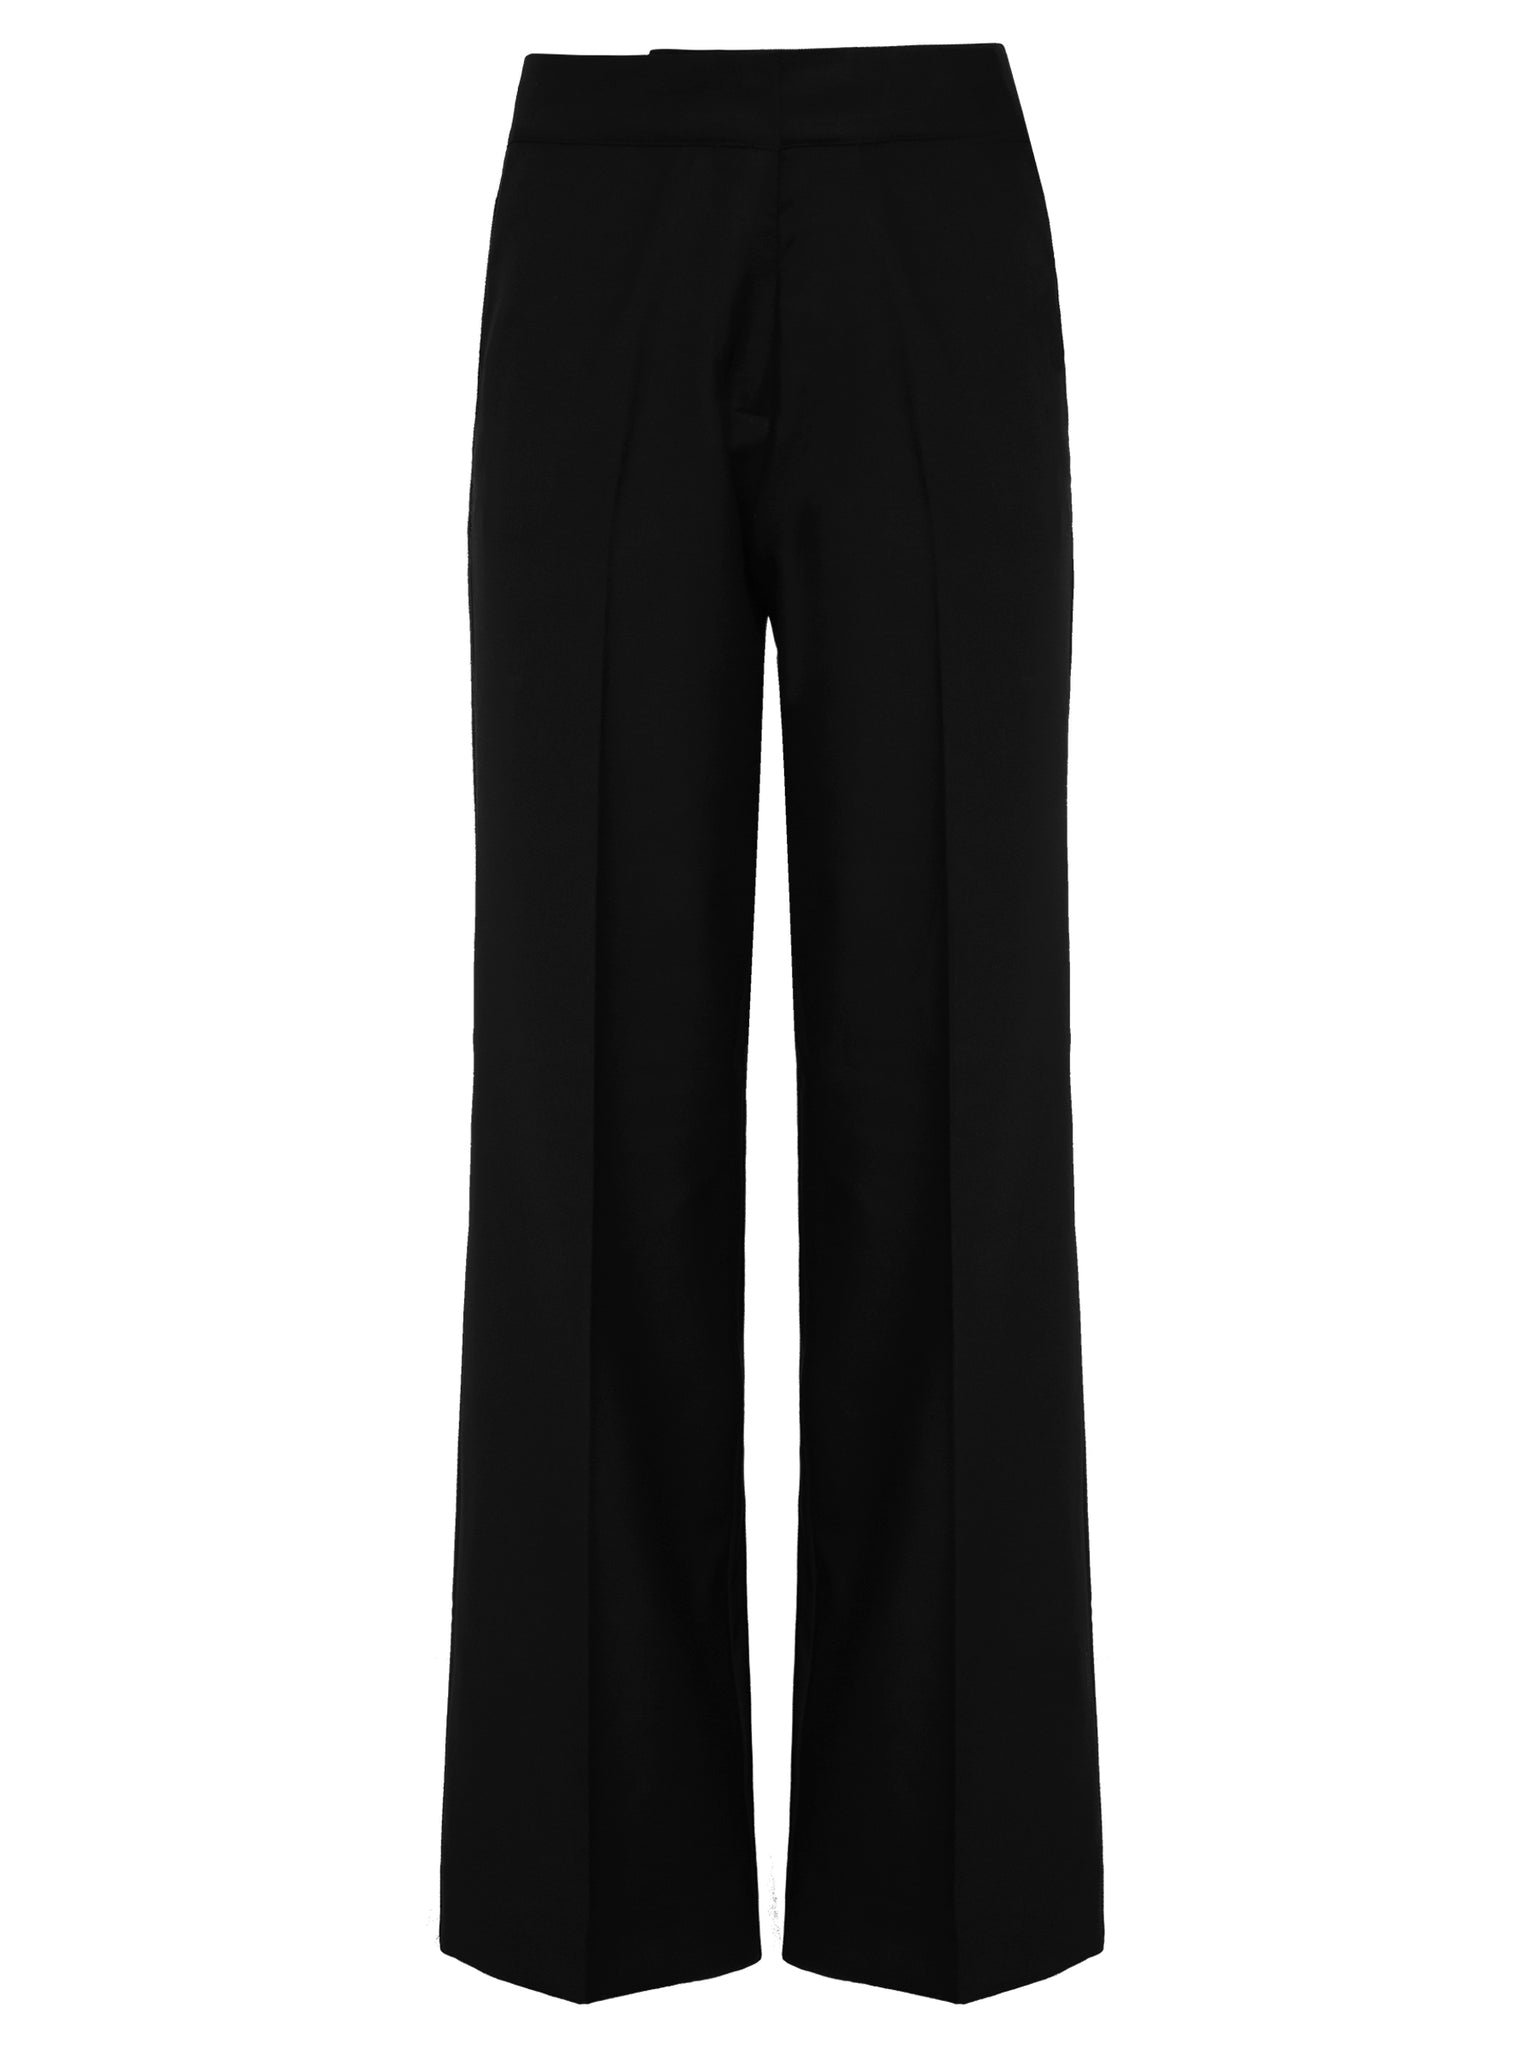 Arnsdorf | Suit Trouser in Black | The UNDONE by Arnsdorf